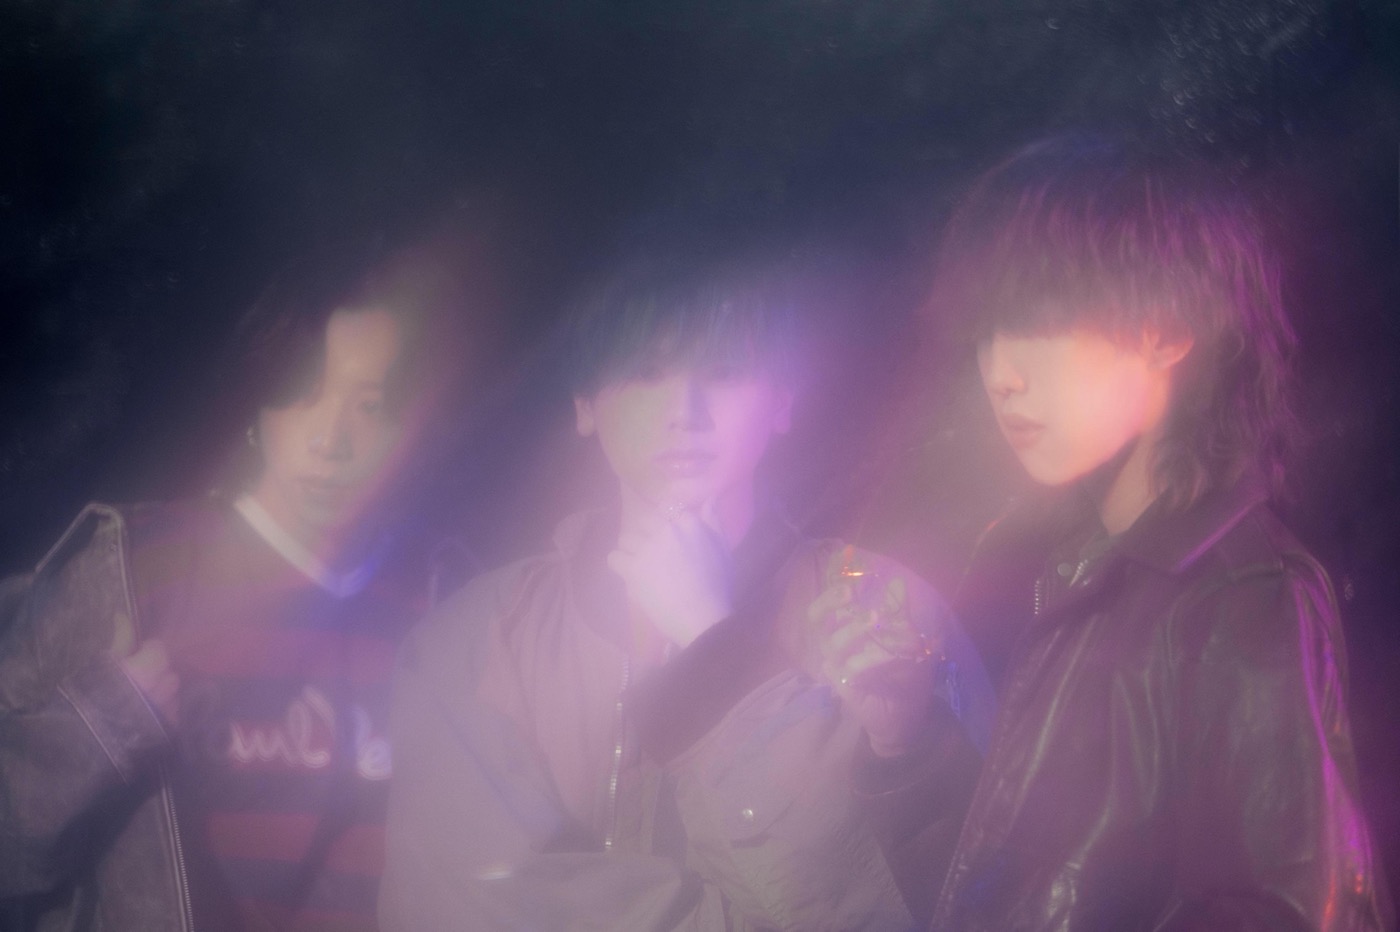 Aile The ShotaとBE:FIRSTのSOTA＆MANATOによるユニット“ShowMinorSavage”、1stEP収録曲「SUPER ICY」MVのプレミア公開が決定 - 画像一覧（4/4）